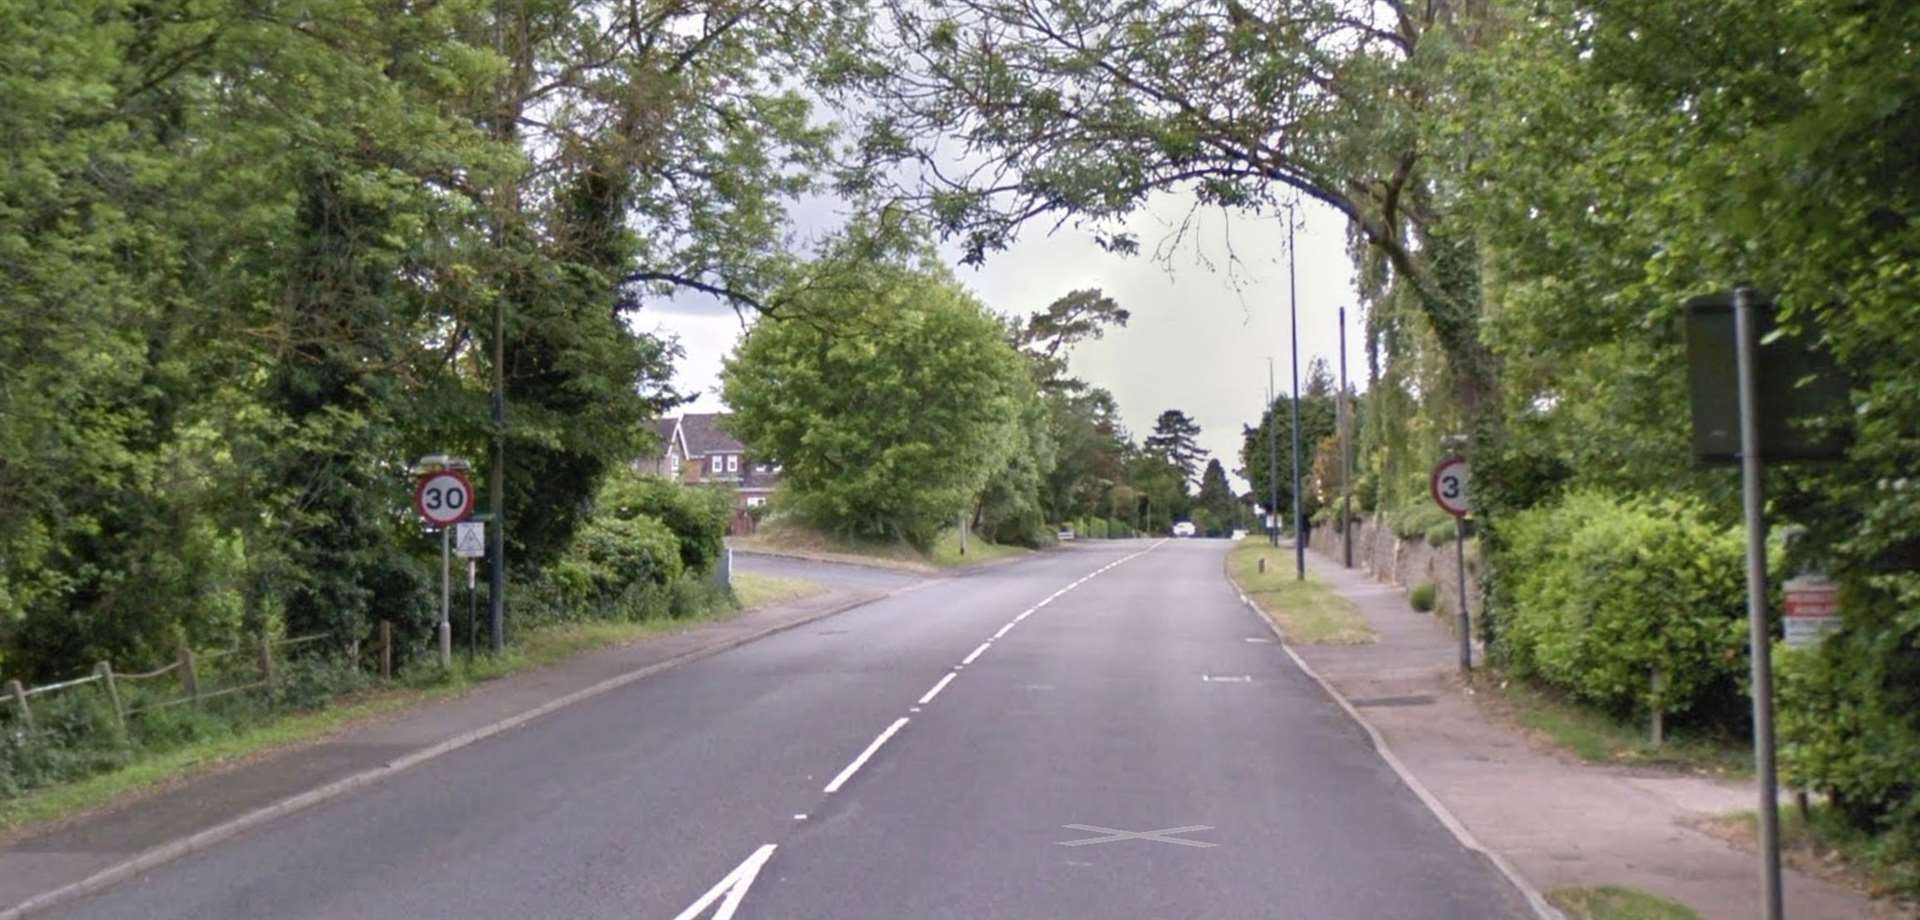 A20, Ashford Road, Bearsted. Picture: Google Street View